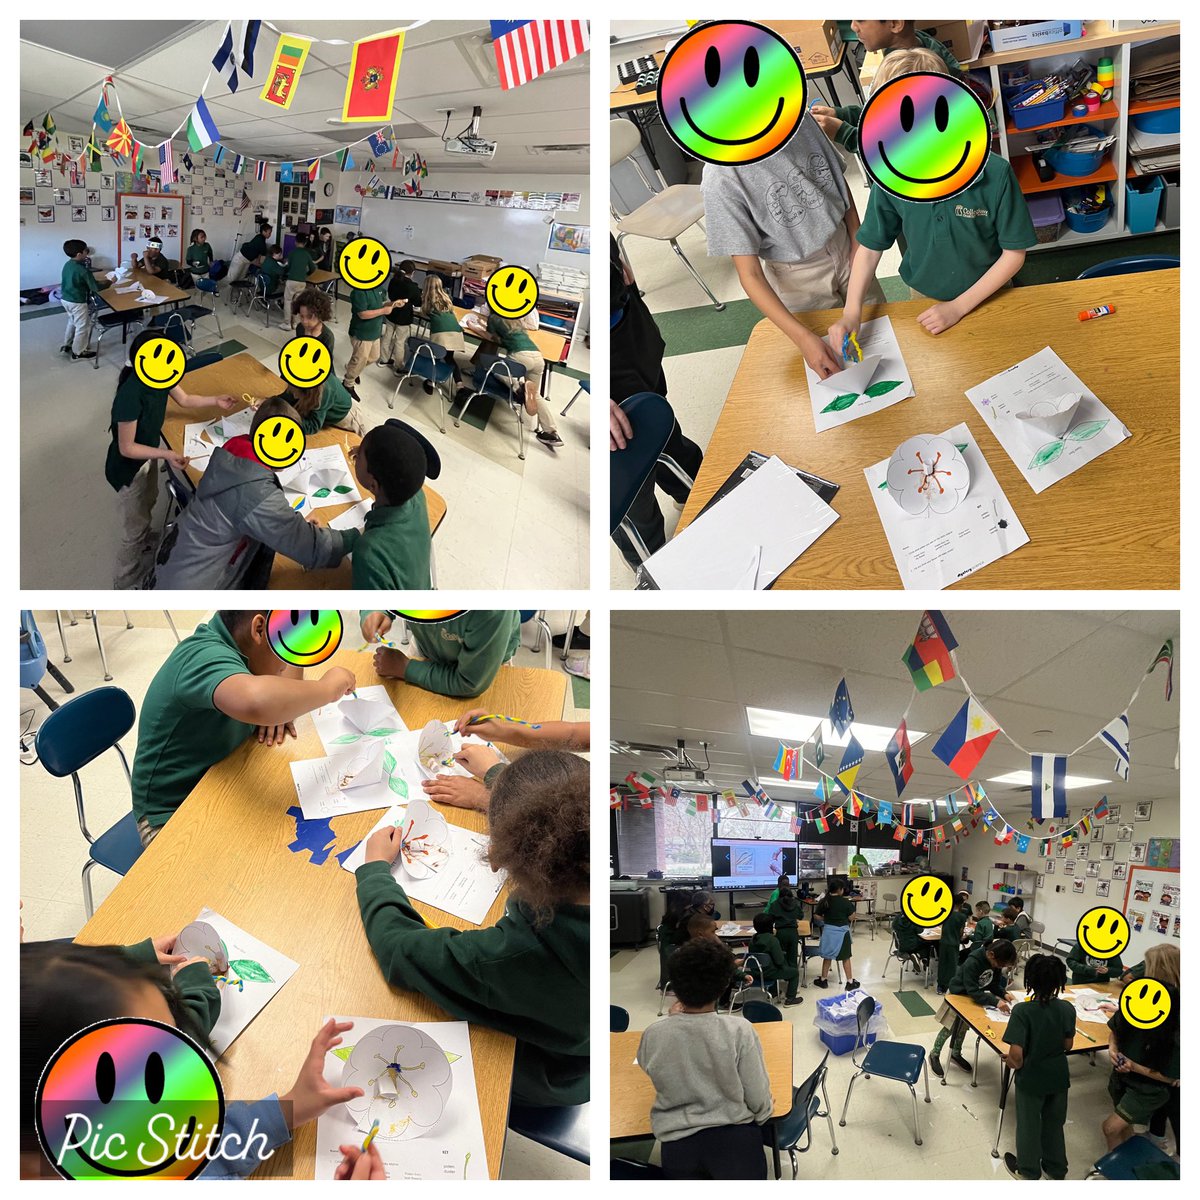 This week my #2ndgraders worked on being a #pollinator. They designed a flower to pollinate and created a bee! Thanks to @MysterySci for an amazing lesson! #STEMinPA #teacher #STEM #STEAMEd #AutismEd #ESL #EnvironmentalEducation #ComputerScience #SEL #CS4CC #AI